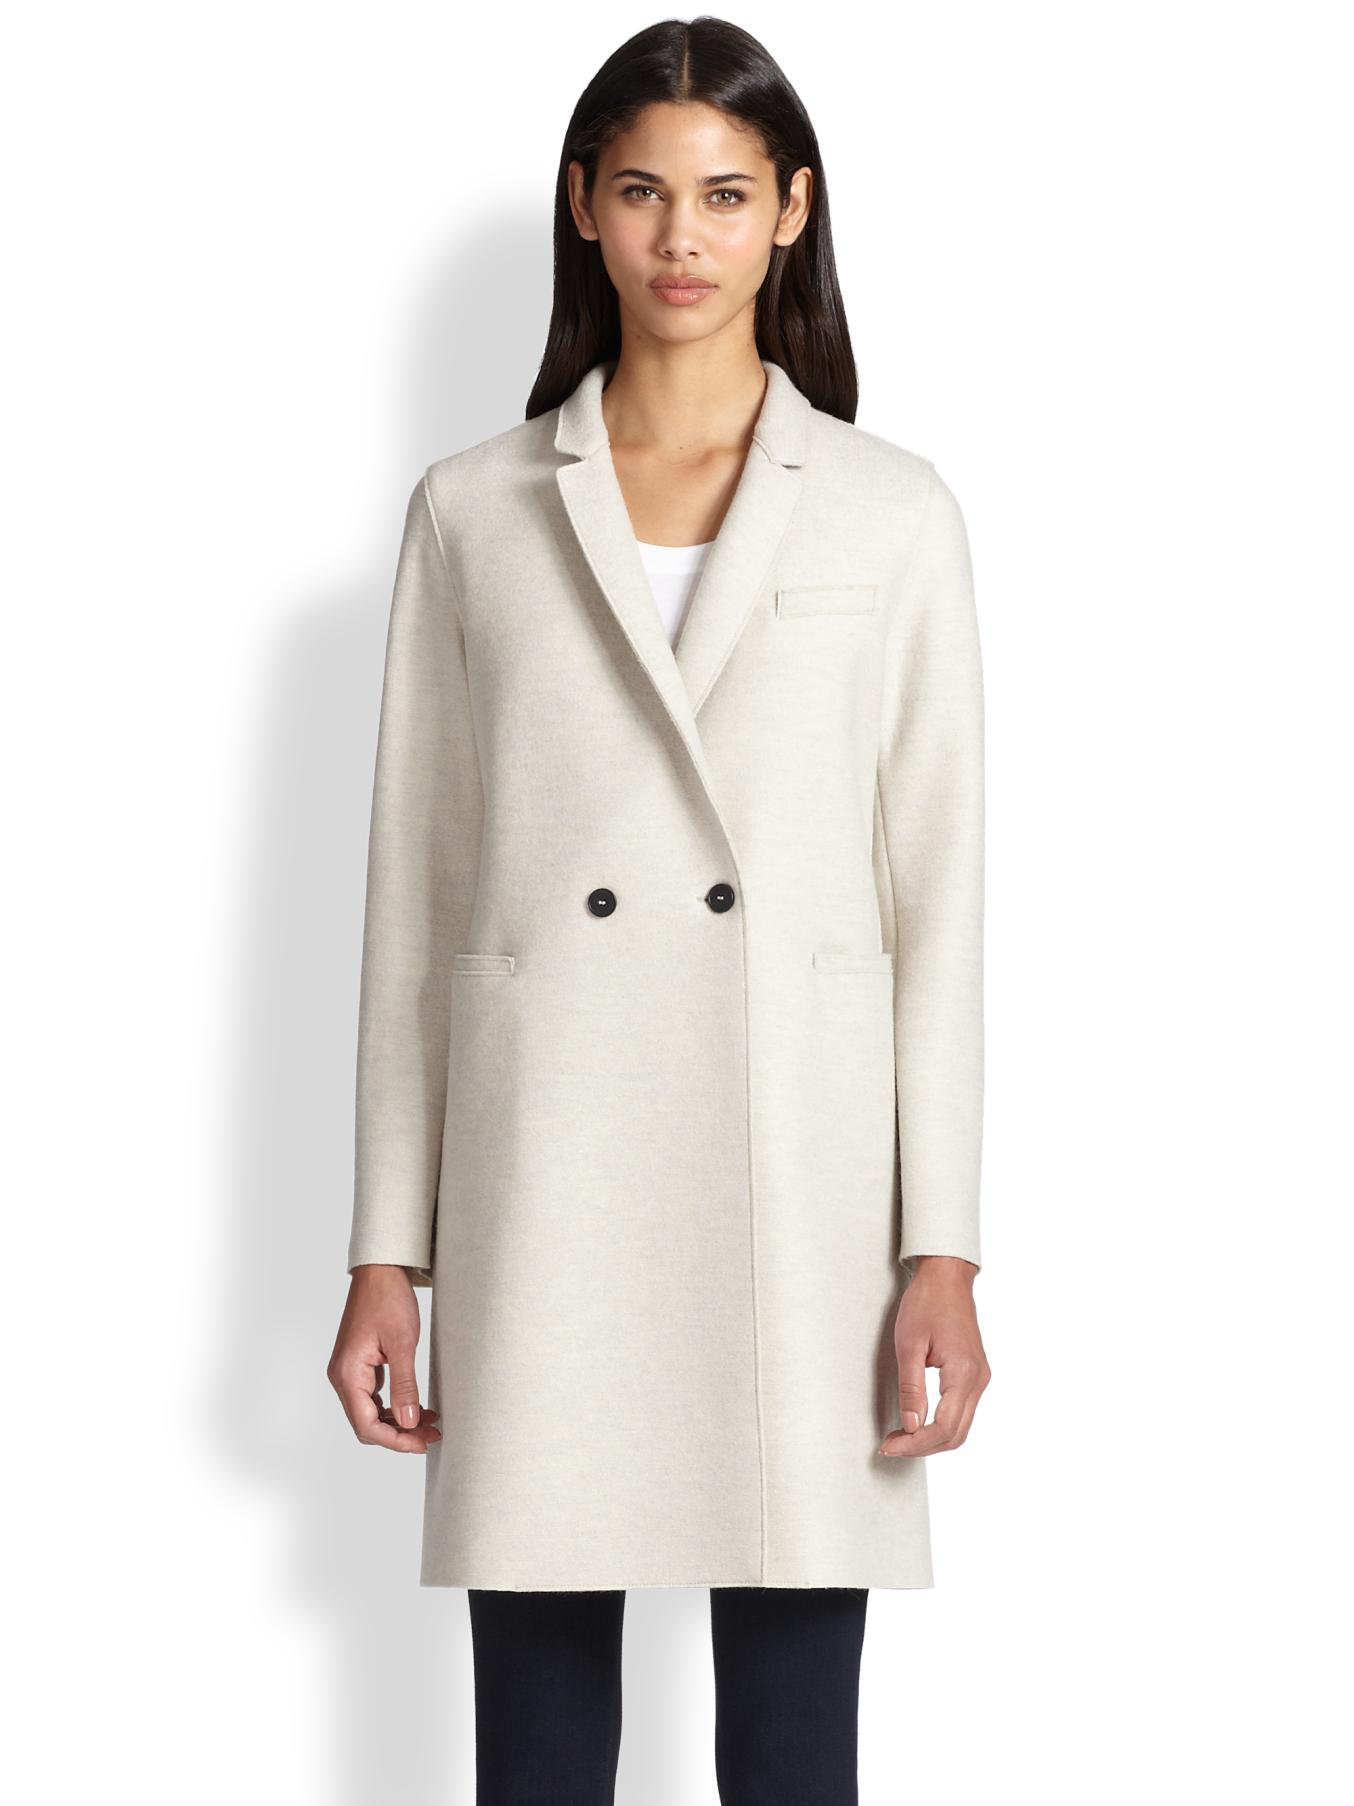 Lyst - Harris Wharf London Double-Breasted Wool Coat in Natural